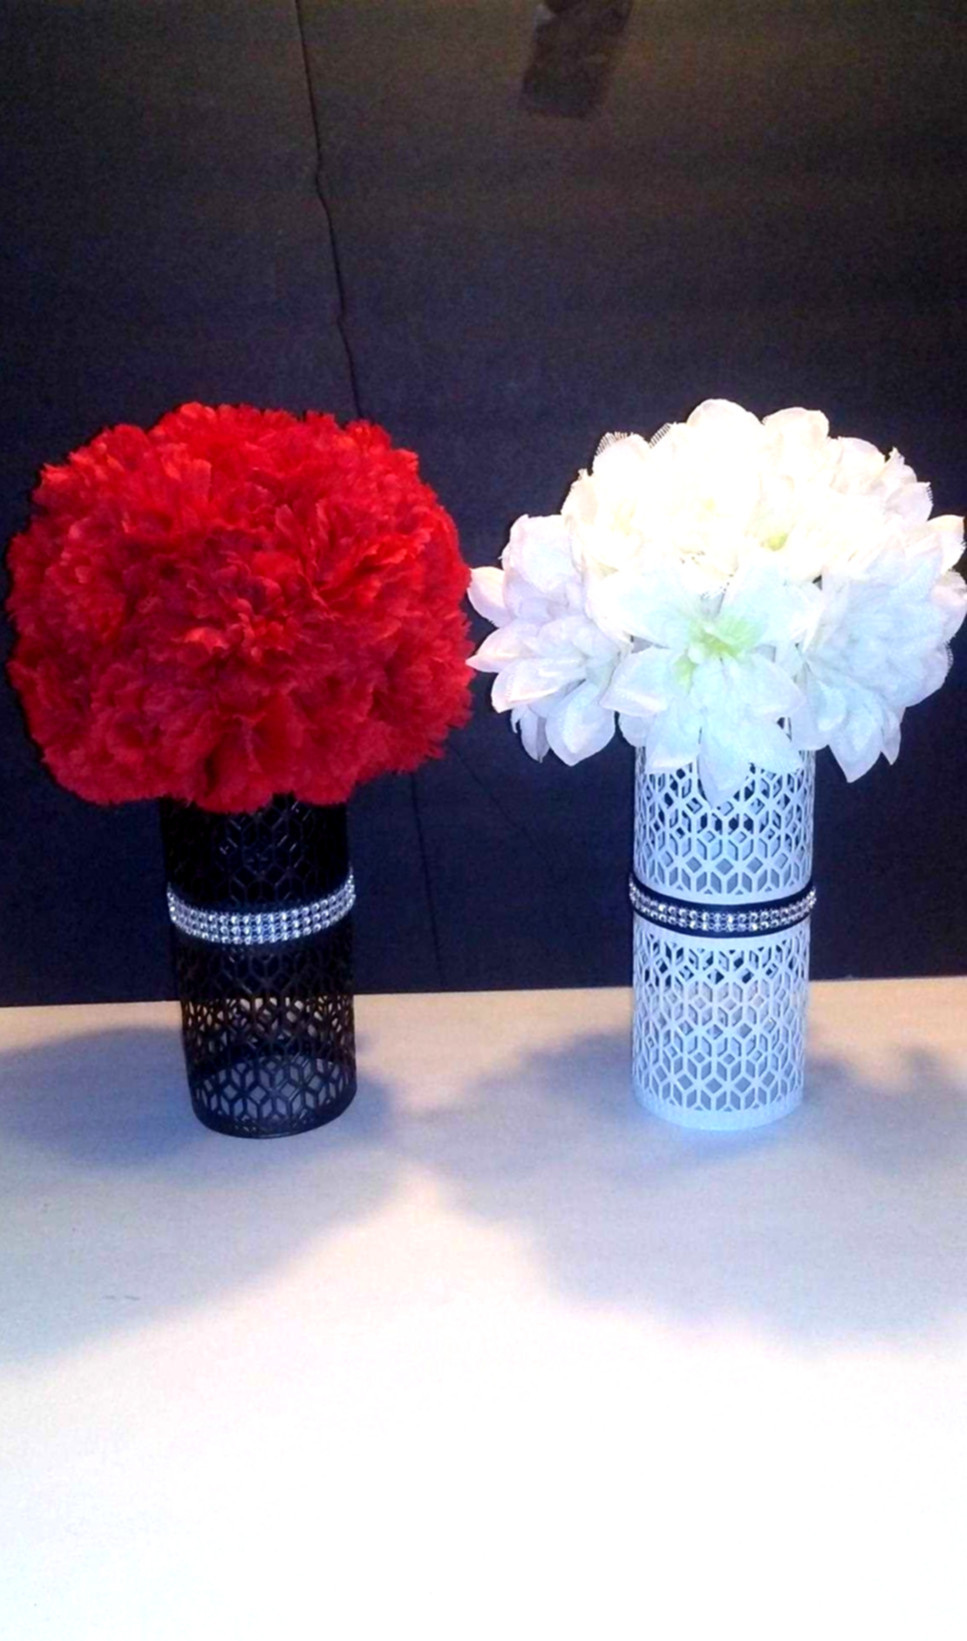 13 Wonderful Water Vase Centerpieces 2024 free download water vase centerpieces of diy dollar tree glam vases diy floral home decor one dollar regarding diy dollar tree glam vases diy floral home decor one dollar pictures